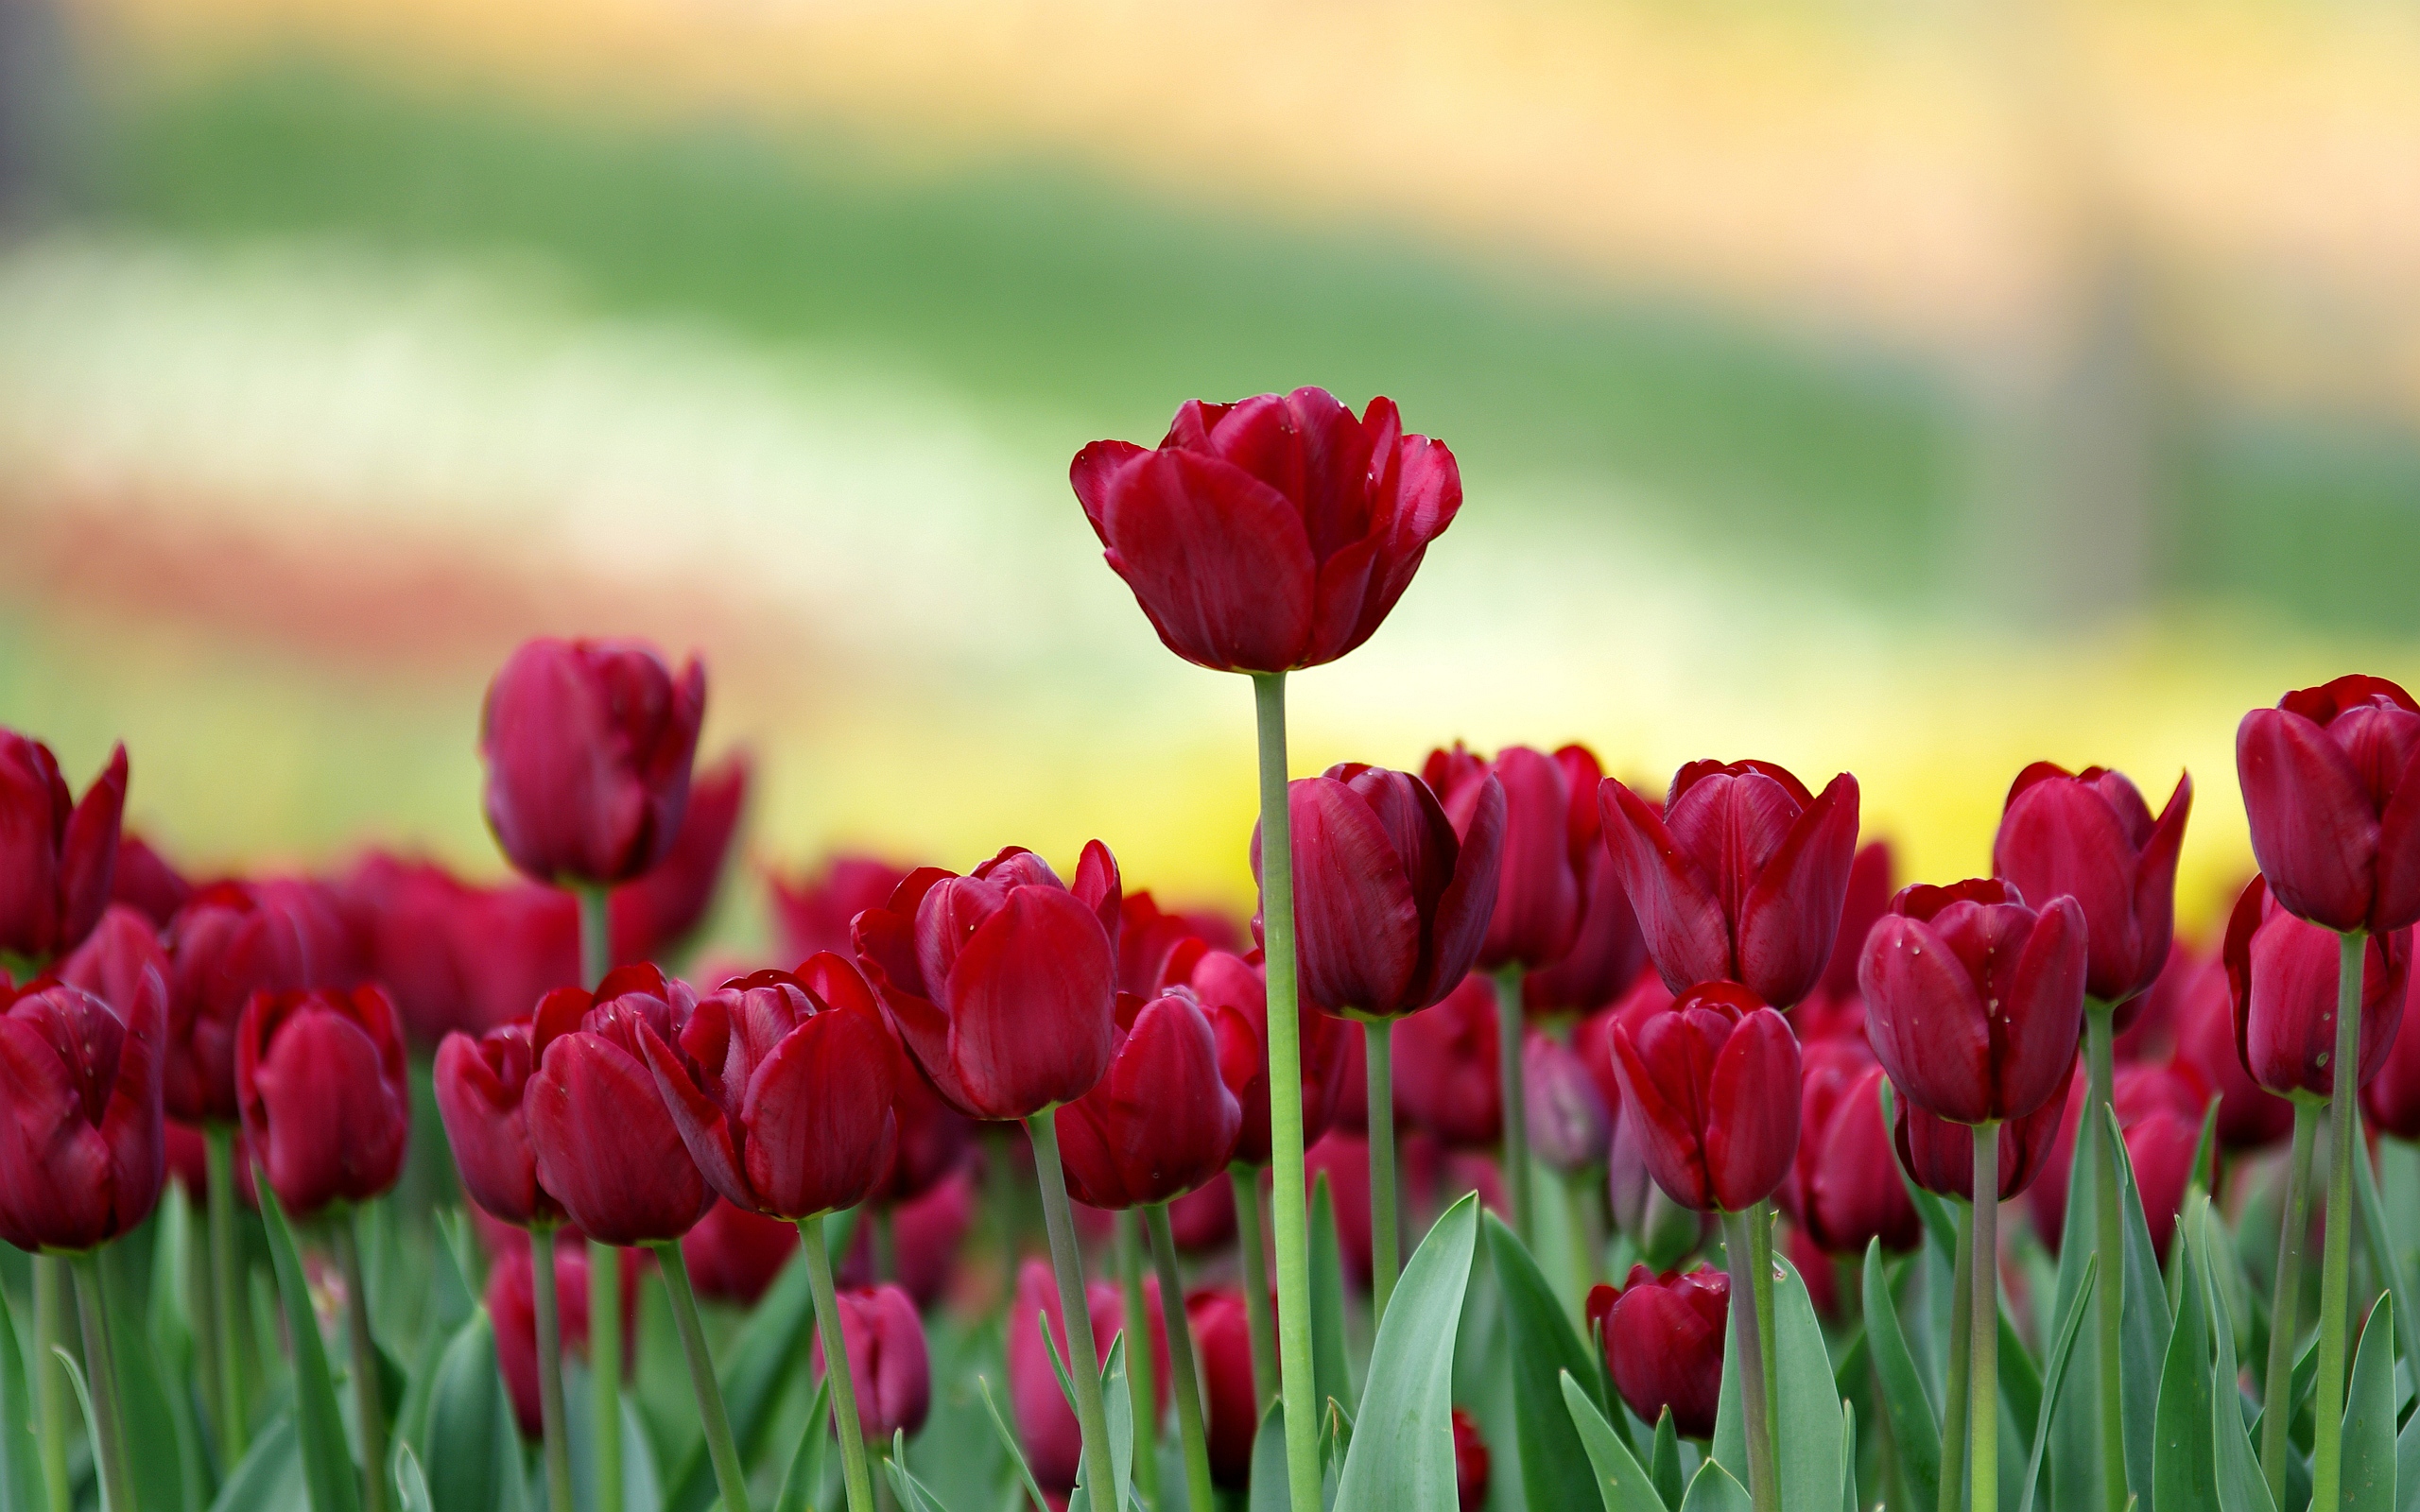 Tulip Flowers Wallpaper | Wallpapers, Backgrounds, Images, Art Photos.